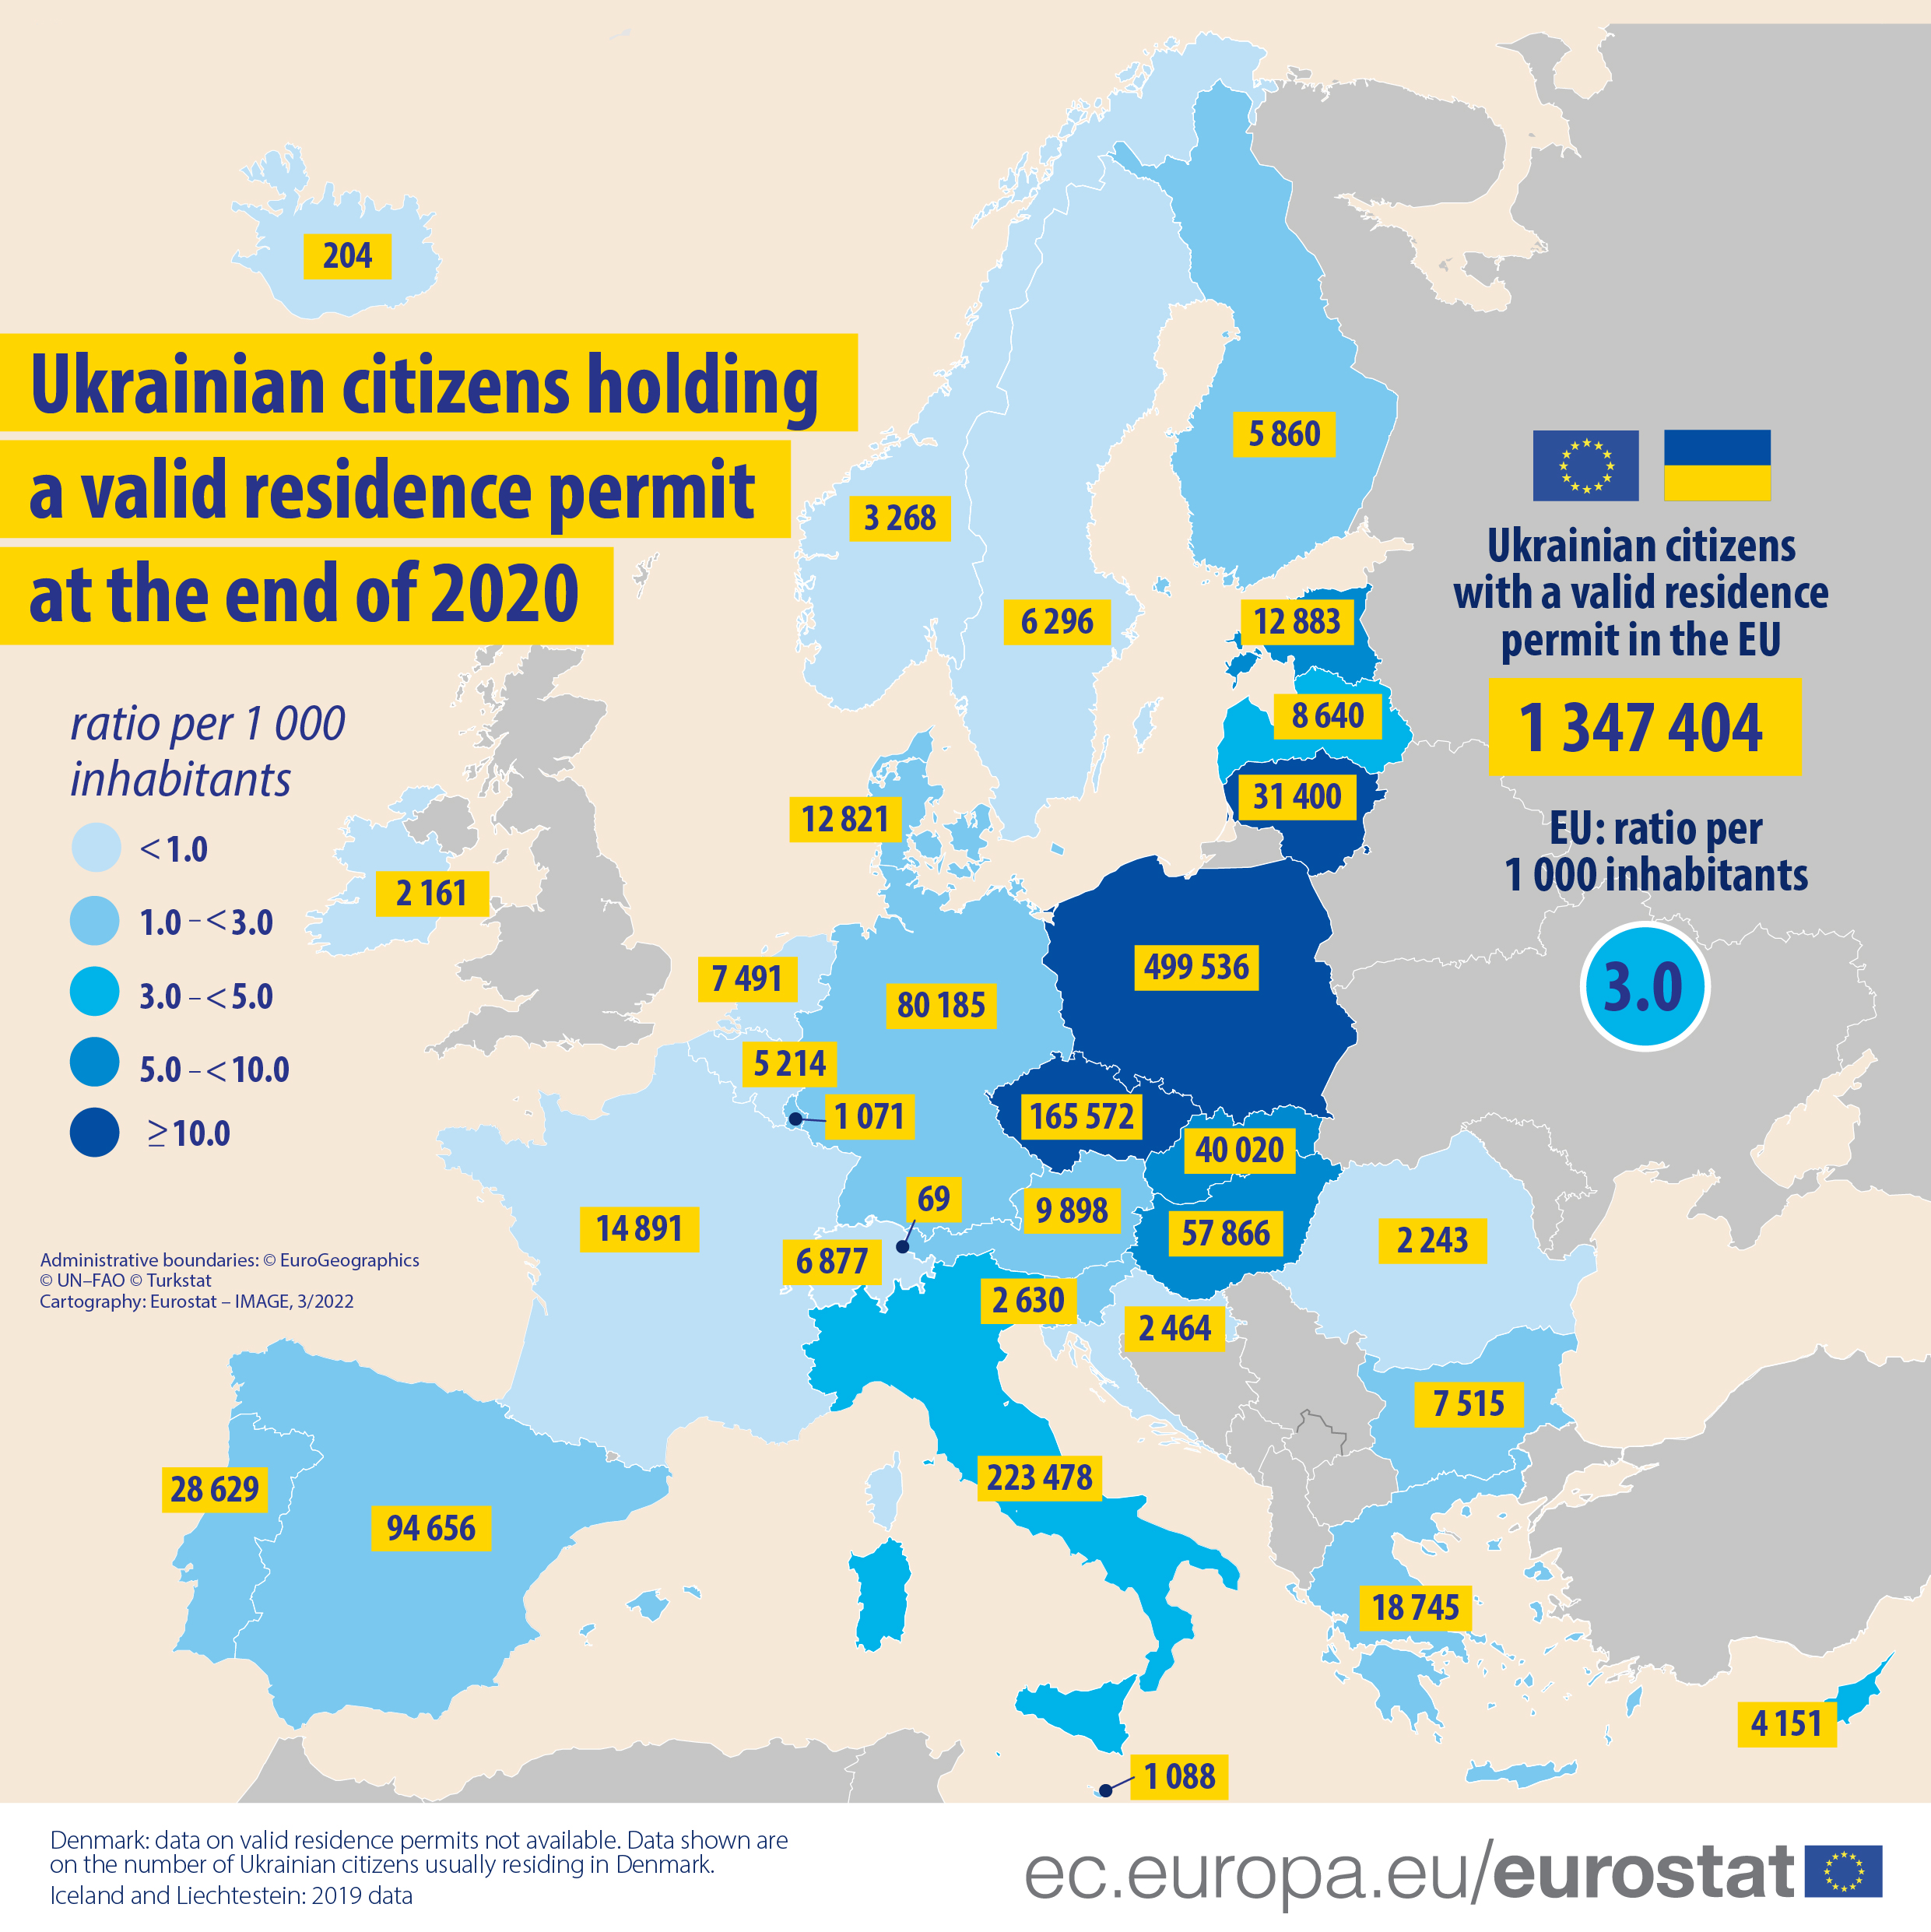 Map: Ukrainian citizens holding a valid residence permit at the end of 2020, absolute value and ratio per 1000 inhabitants, in the EU and EFTA countries